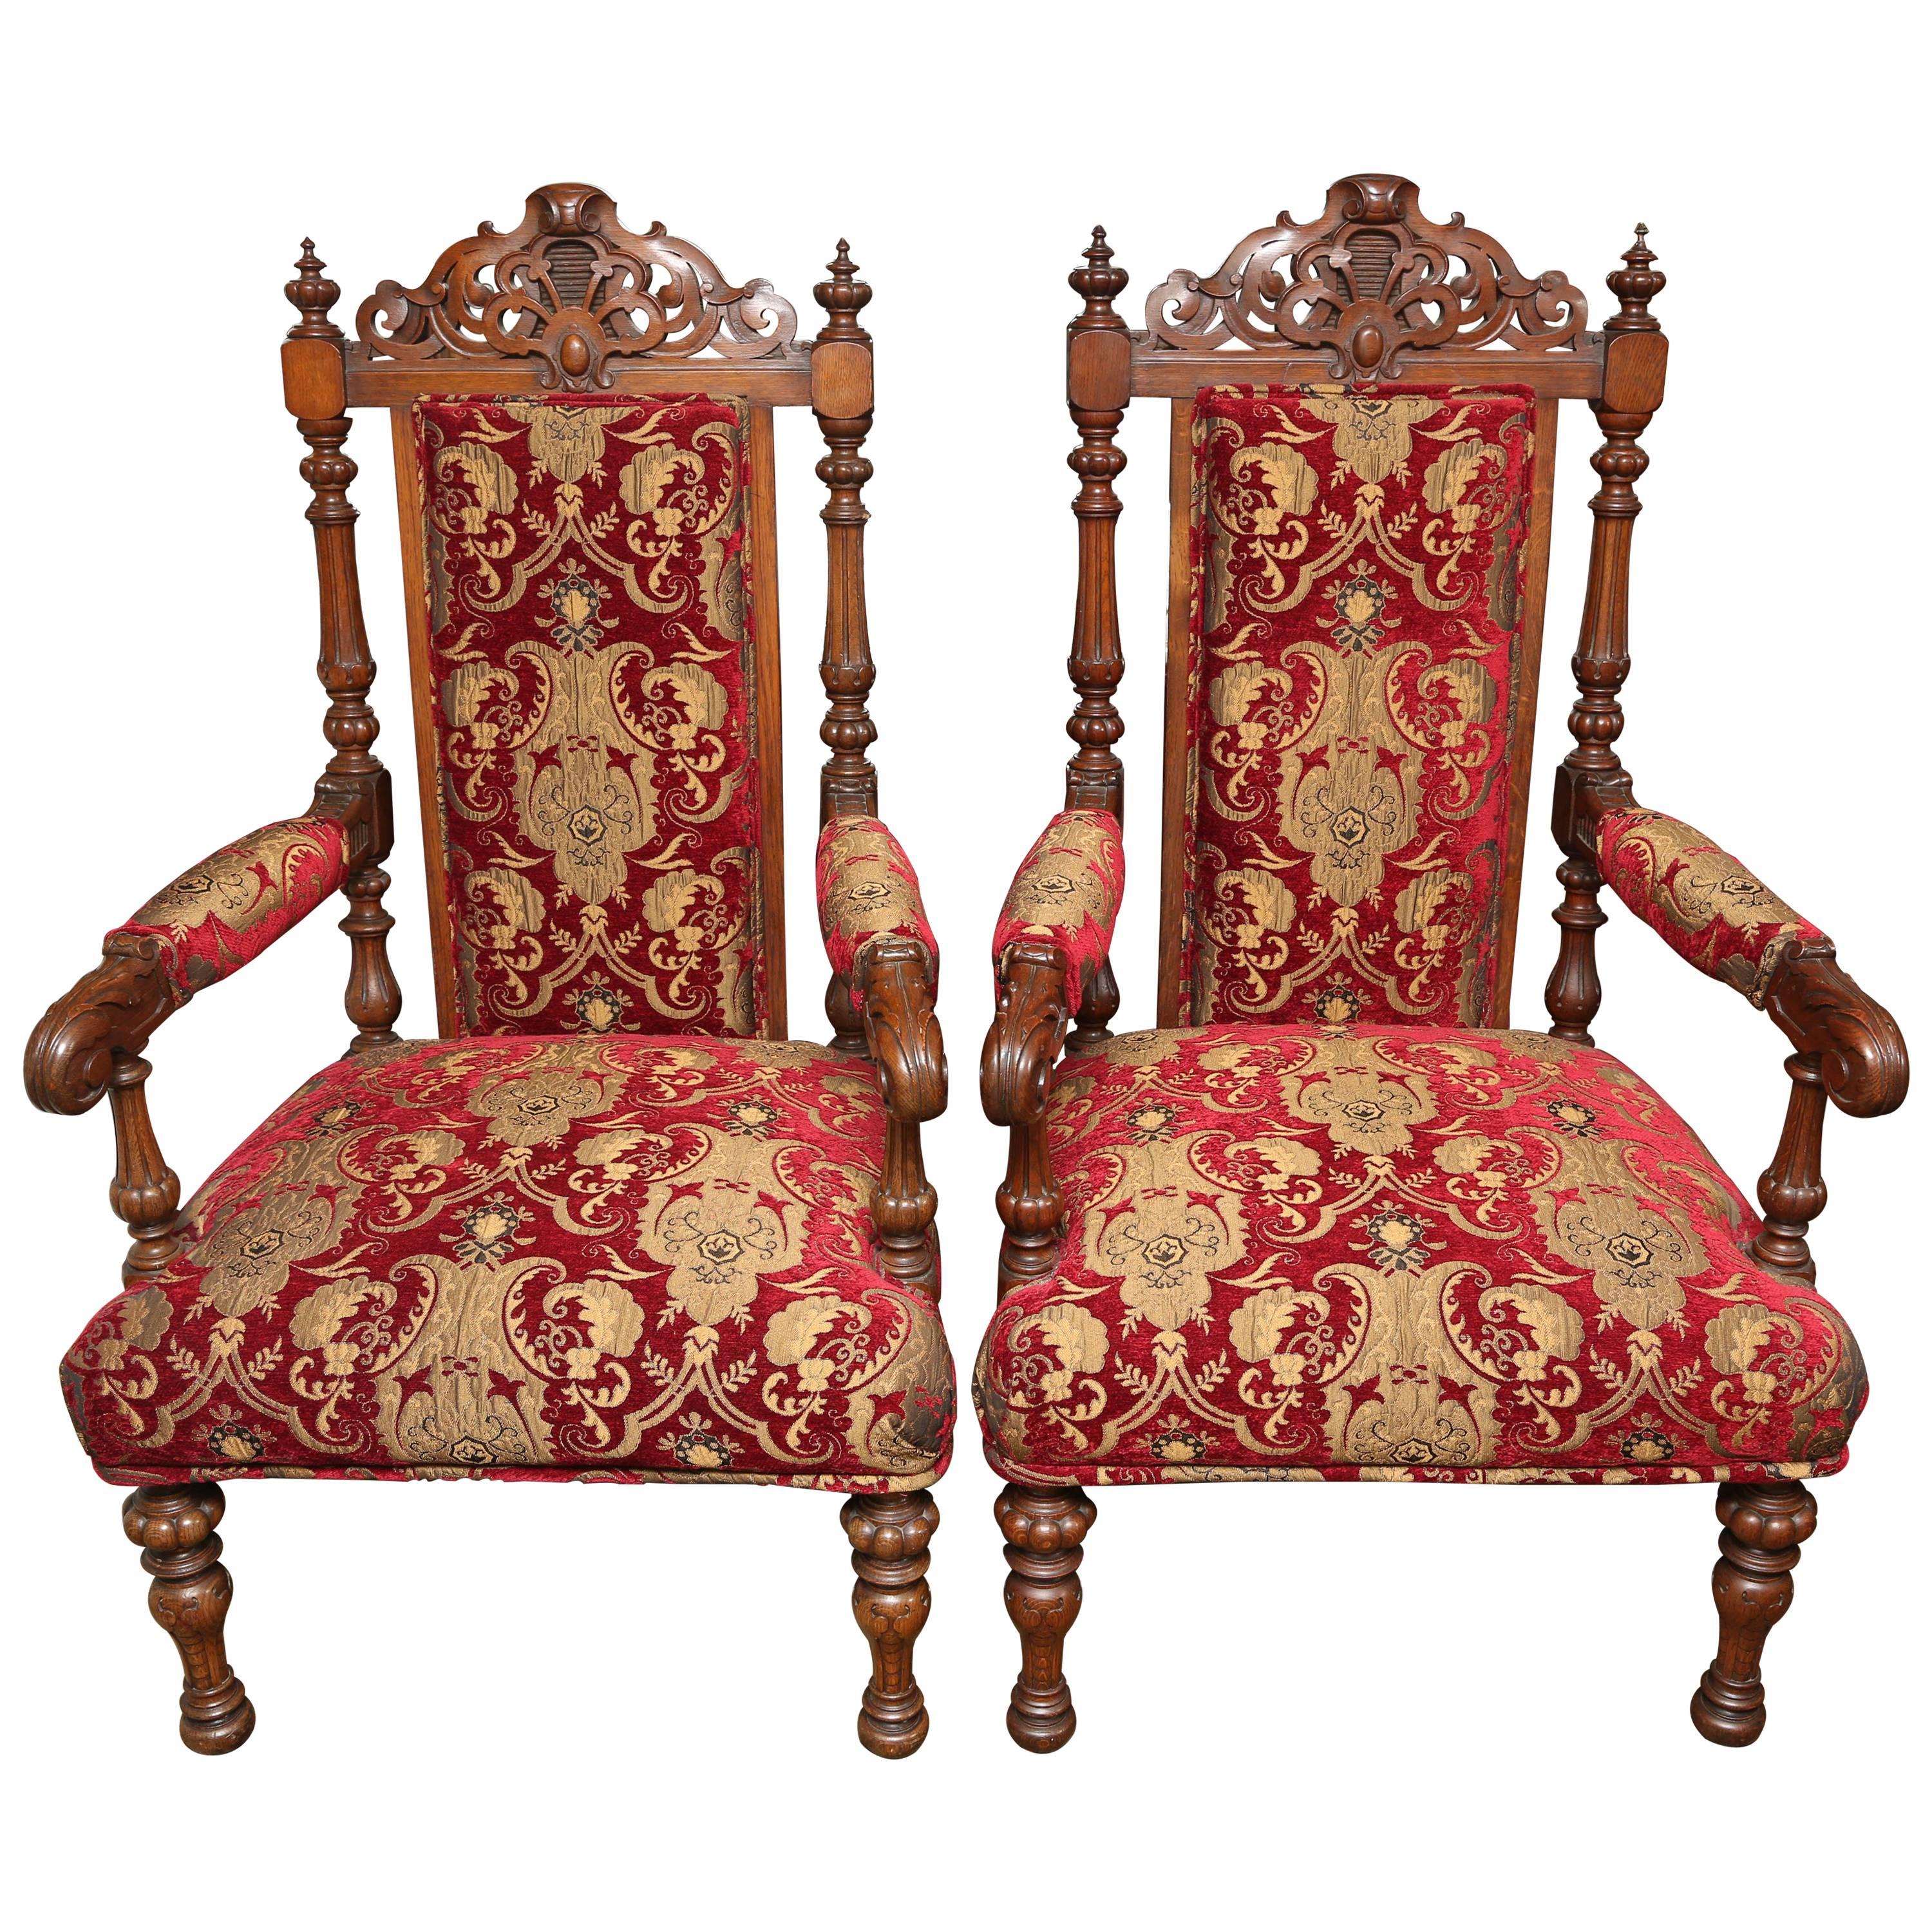 Superb Pair of 19th Century English Carved Oak Armchairs